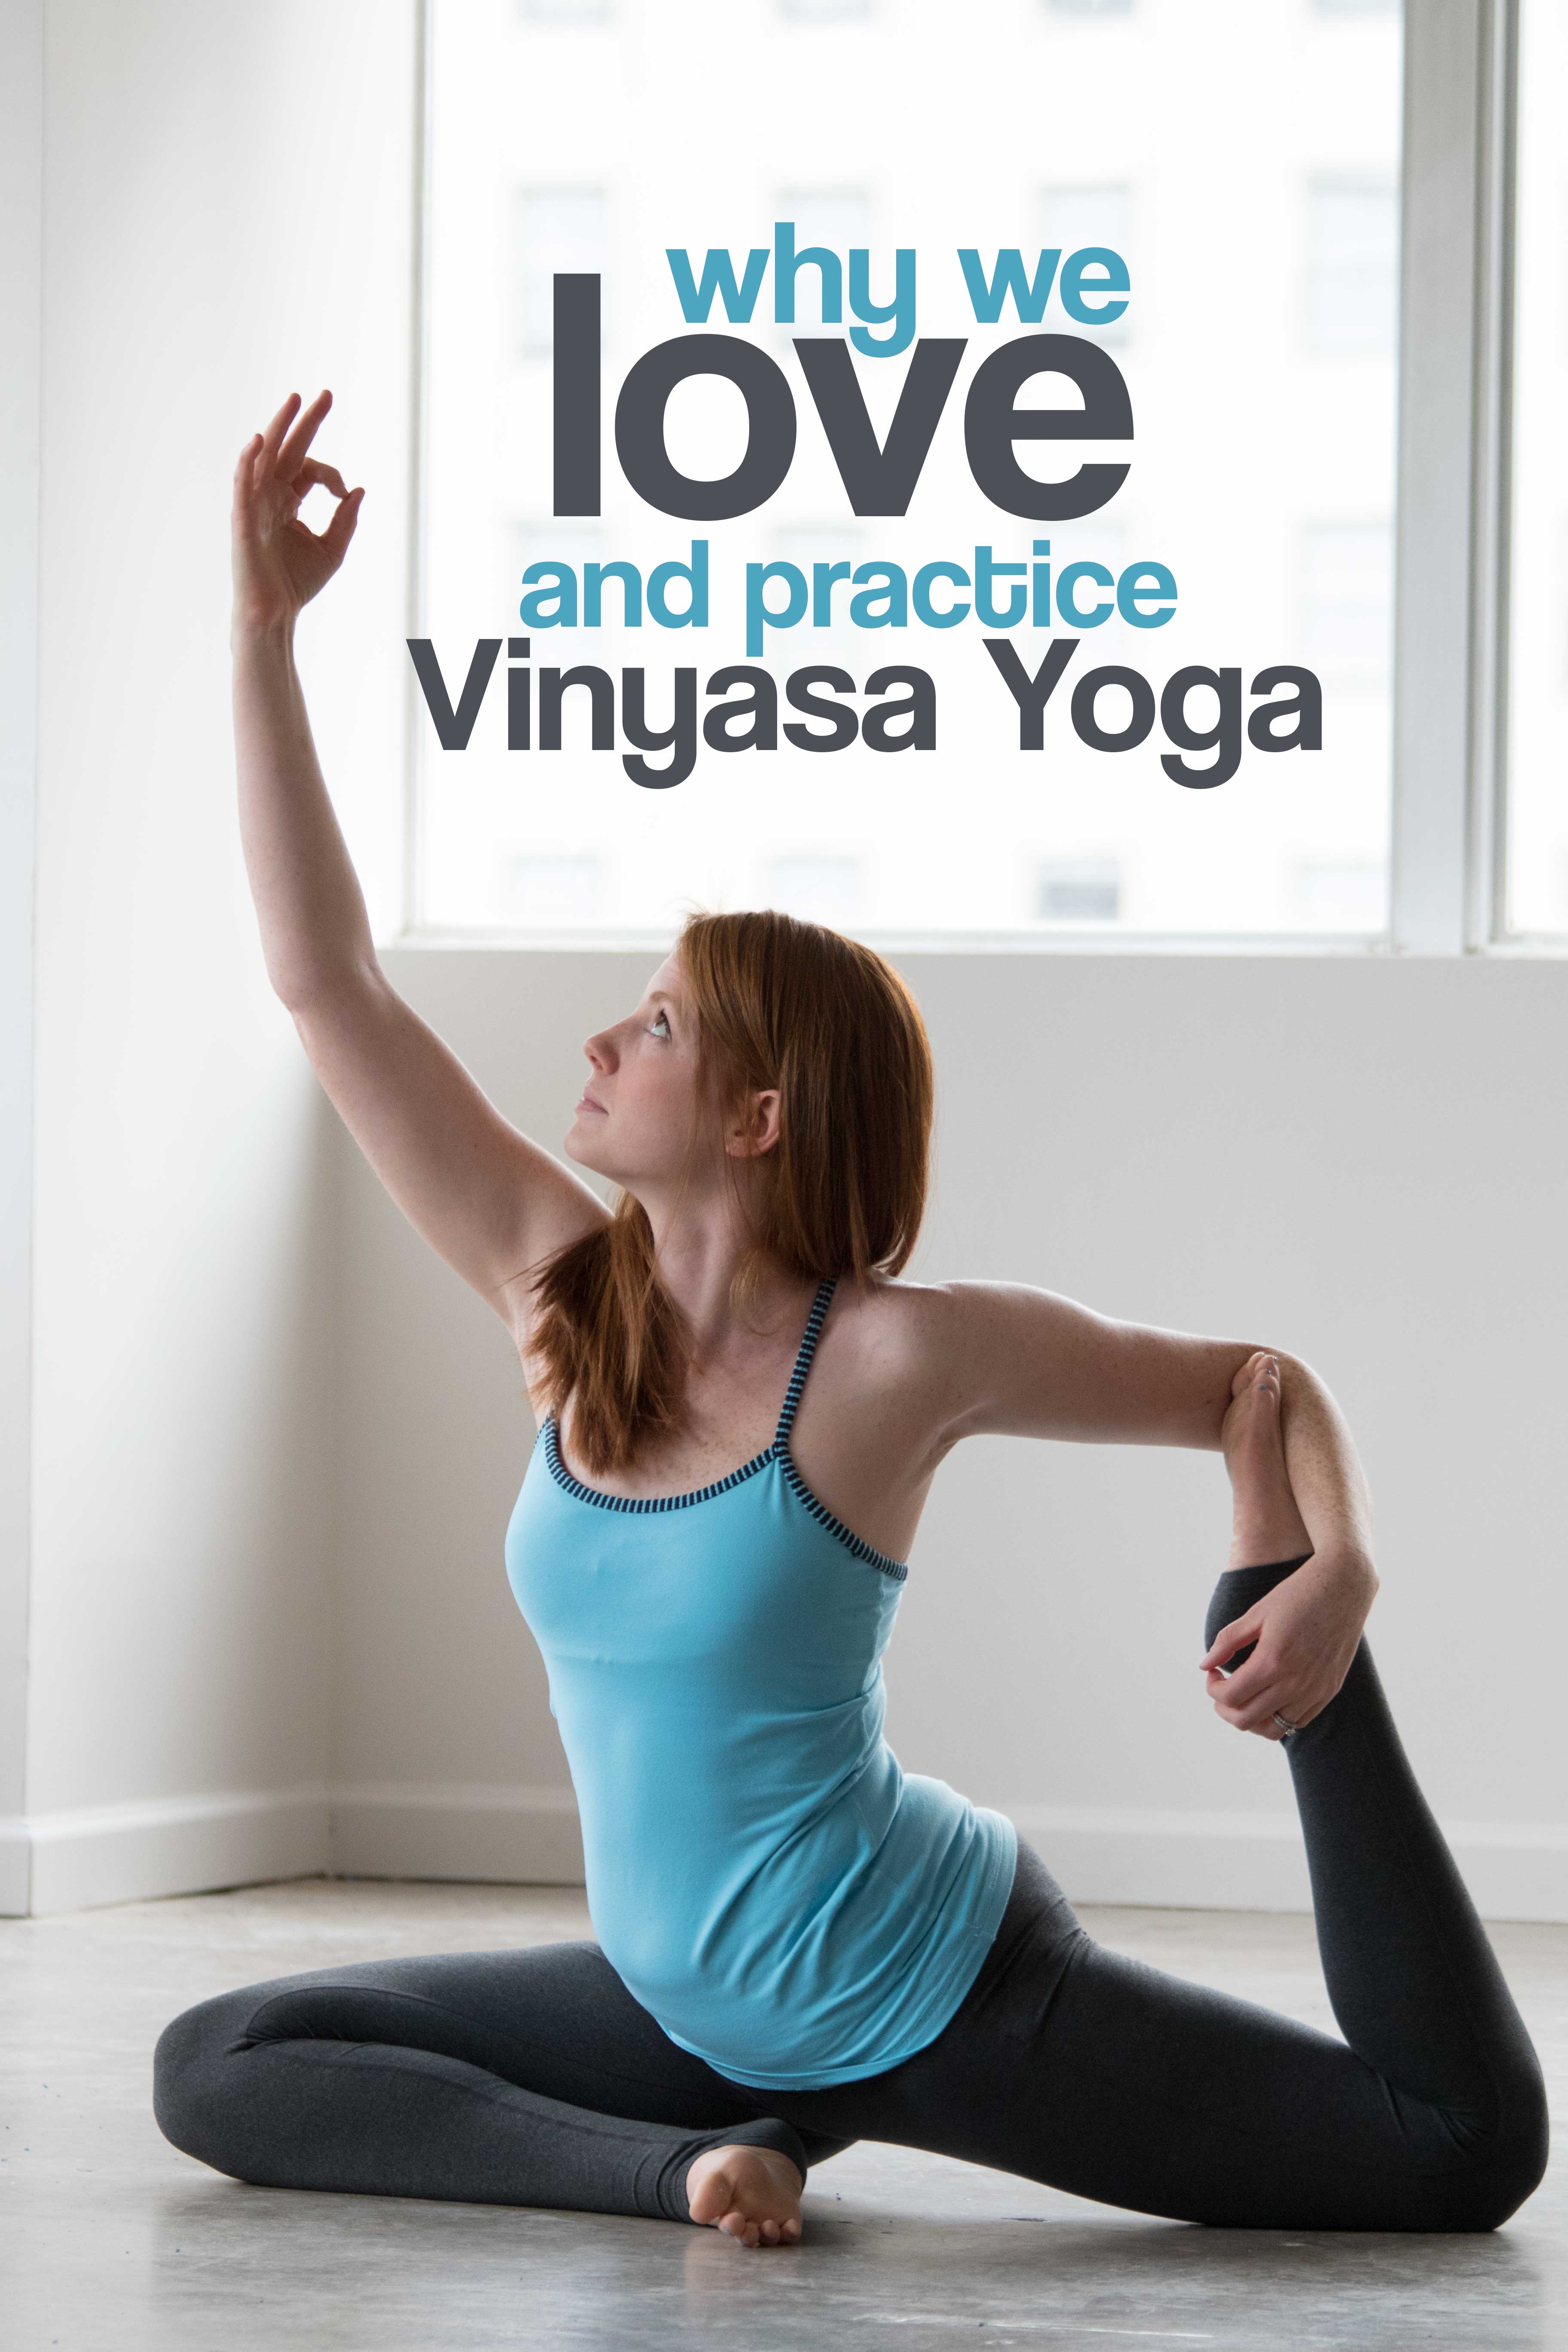 Vinyasa yoga and why we love it here in Dallas's Yogis on the Go!